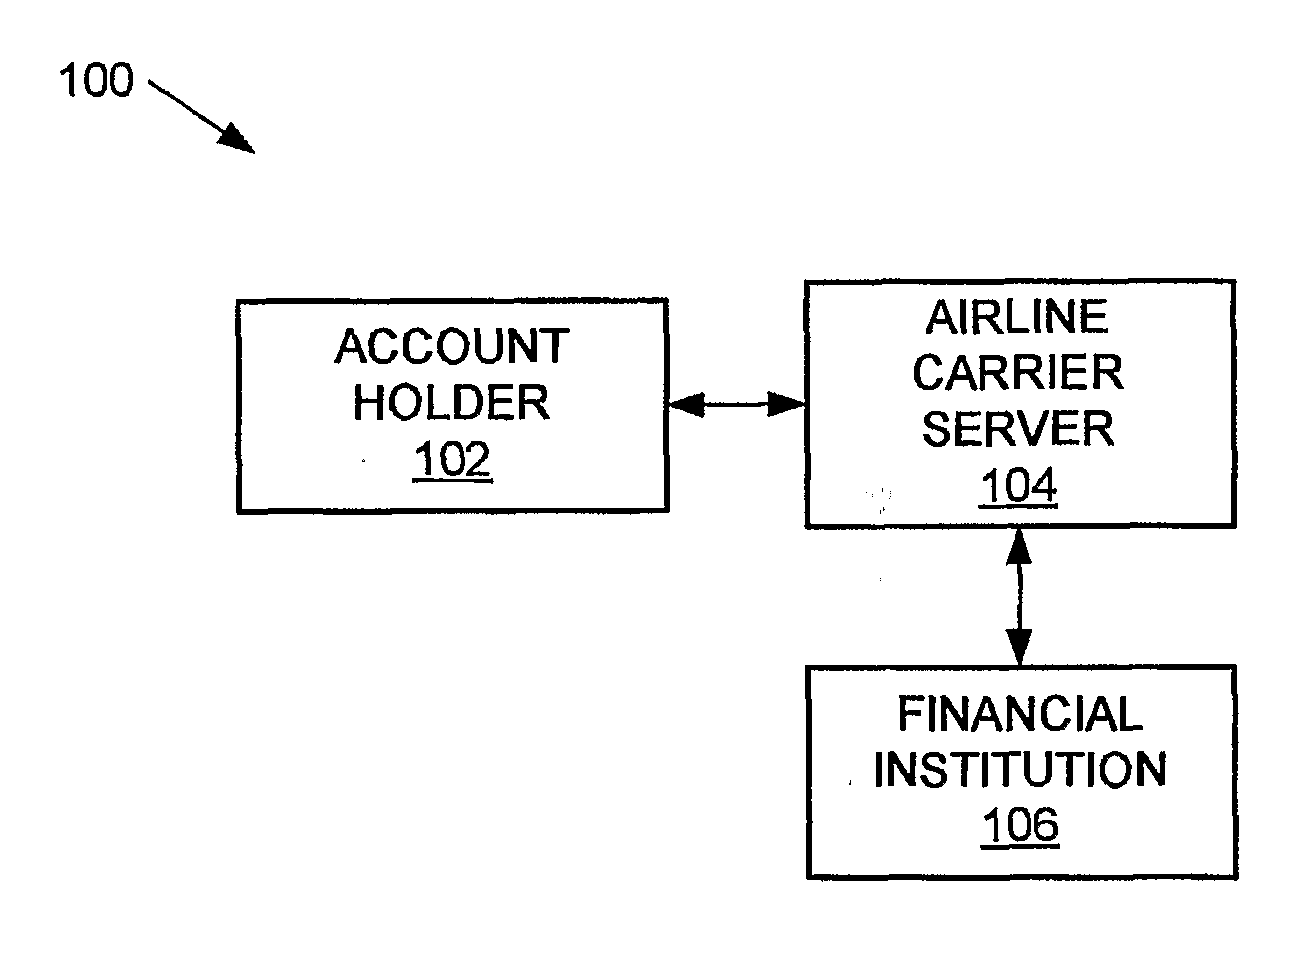 System and Method Using Enhanced Authorization Data to Reduce Travel-Related